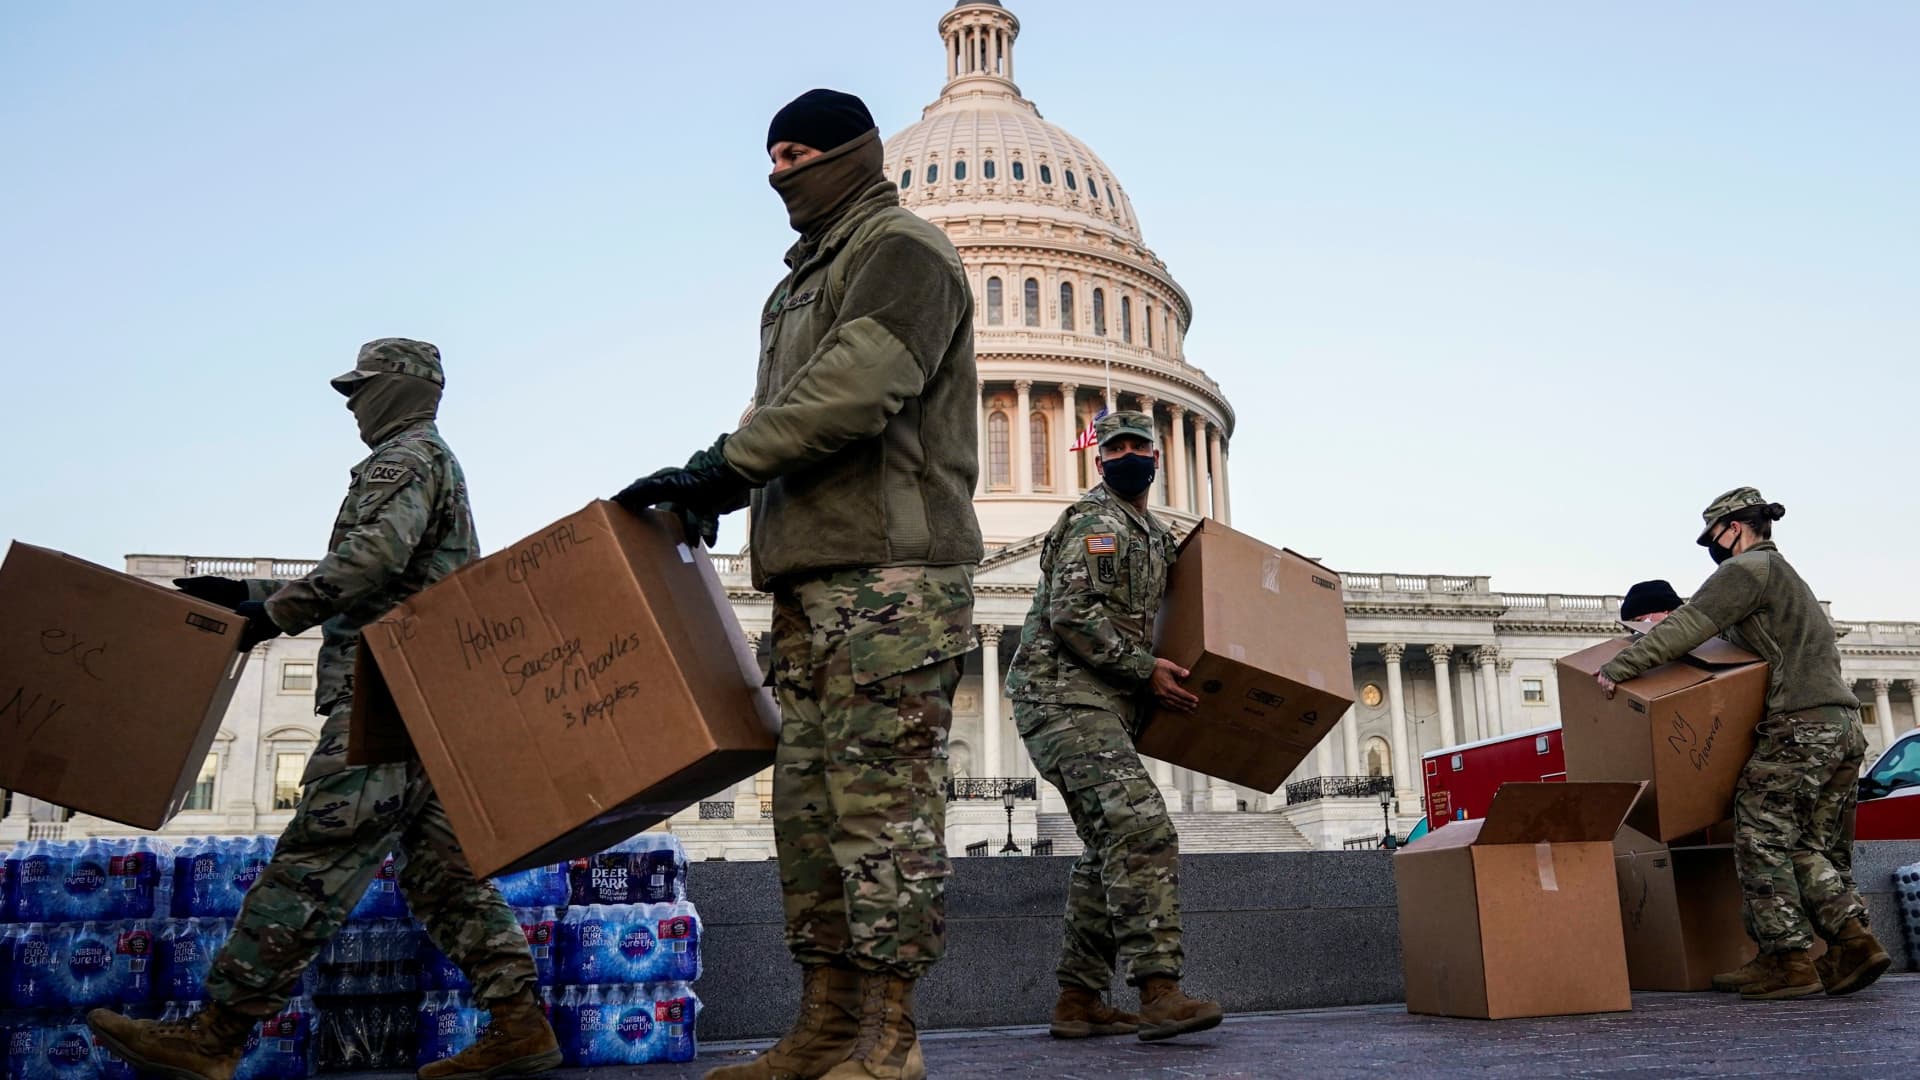 Members of the National Guard move boxes of food at the U.S. Capitol as Democratic members of the House prepare an article of impeachment against U.S. President Donald Trump in Washington, U.S., January 12, 2021.